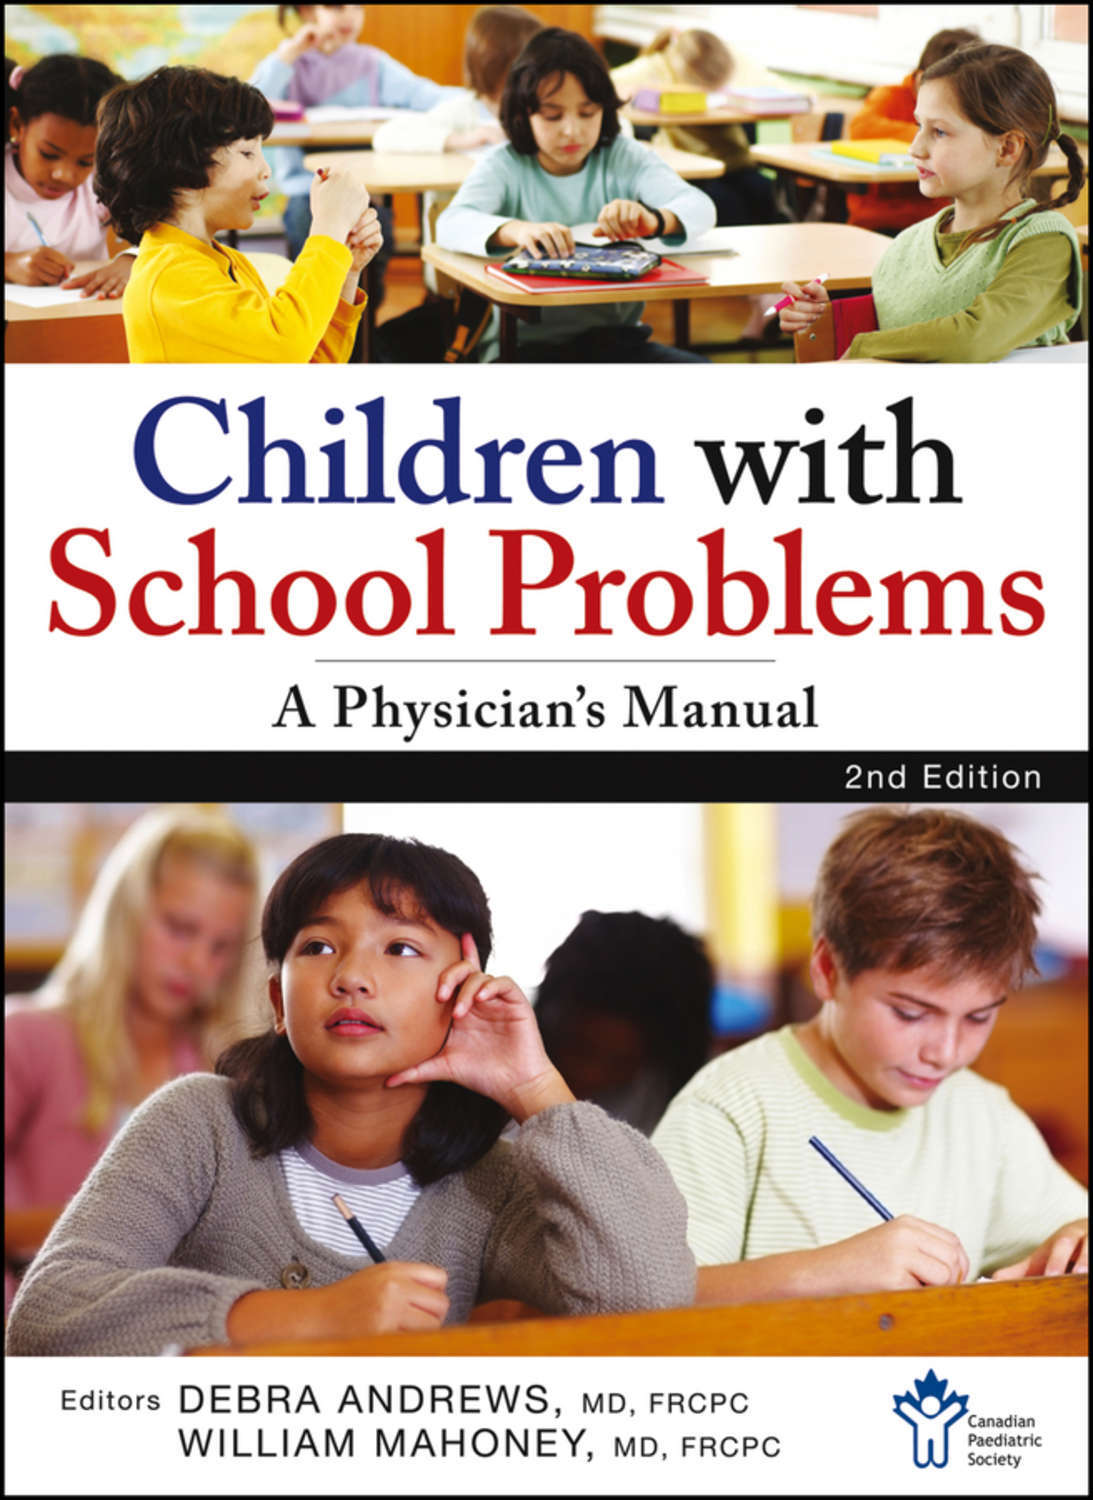 School problems. Children with School problems: a Physician's manual | Andrews Debra, Society the canadianpaediatric. Children book Society. If your children would have a problems at School with English.